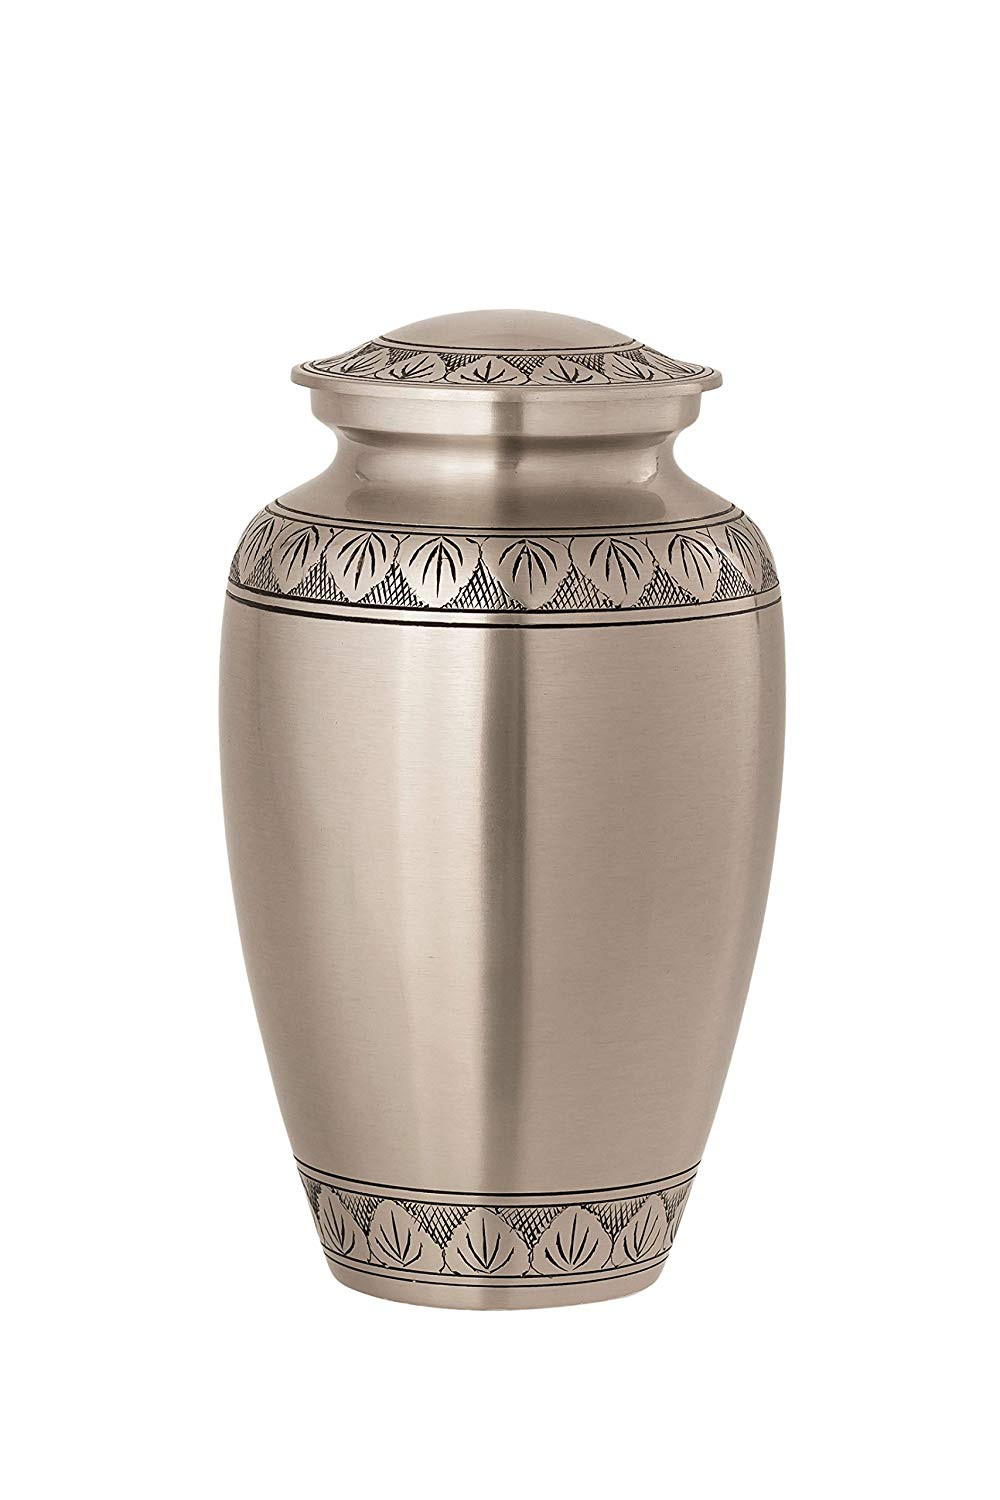 15 Recommended Large Silver Urn Vase 2024 free download large silver urn vase of amazon com enshrined memorials cremation urn for ashes electra in amazon com enshrined memorials cremation urn for ashes electra series affordable solid brass metal 